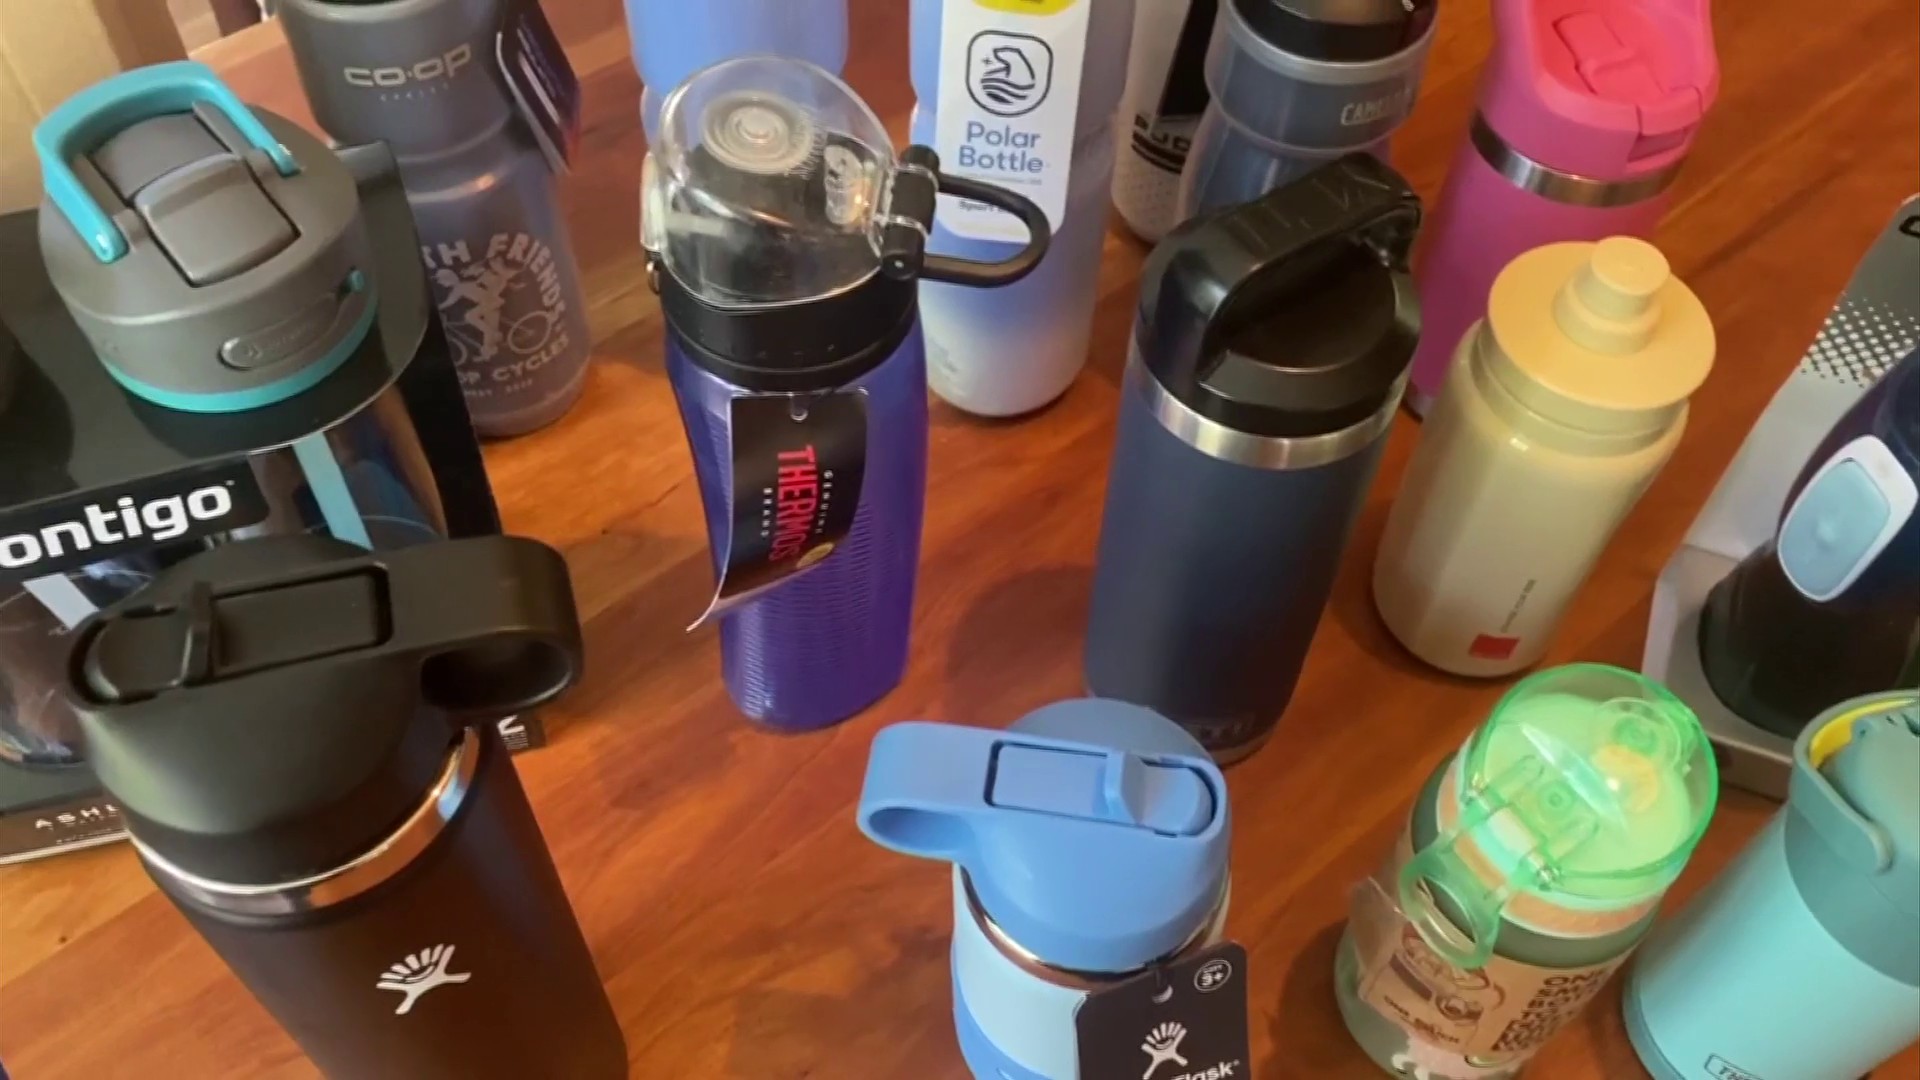 Best Contigo No Spill Tumbler to Buy in 2023. Here are the Top 9 Options